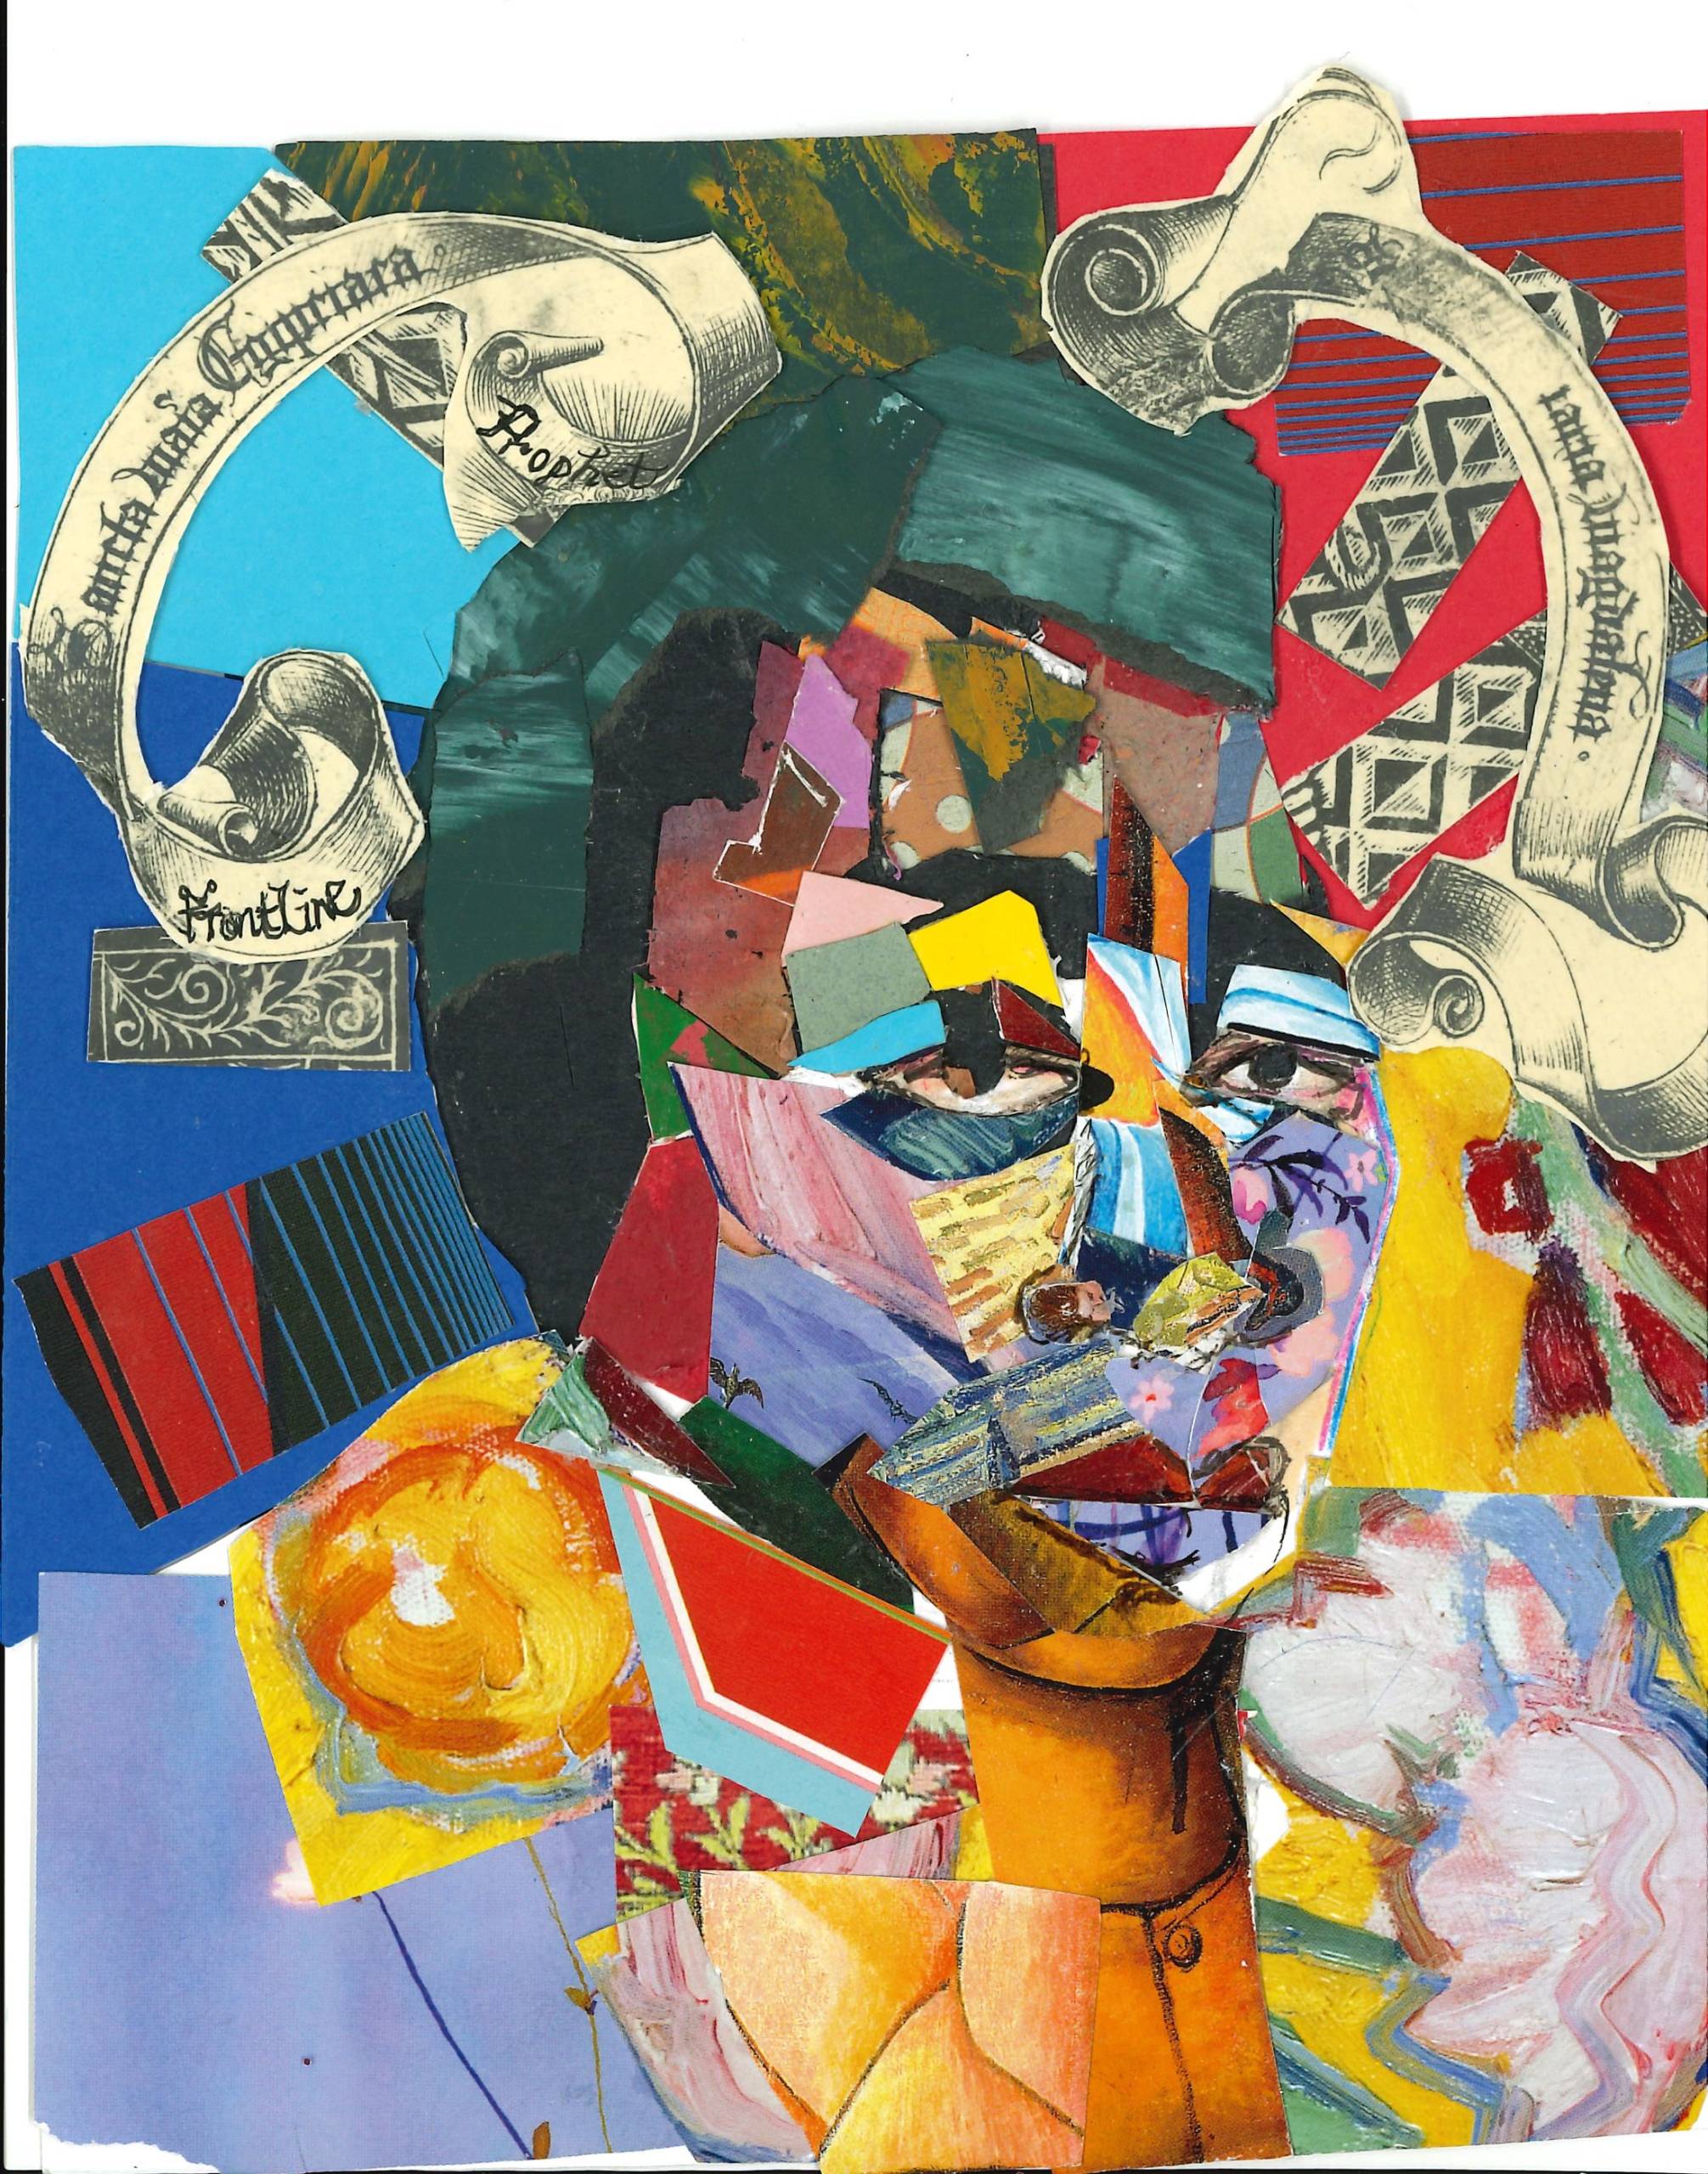 A colorful mixed medium image of James Baldwin, in collage form.